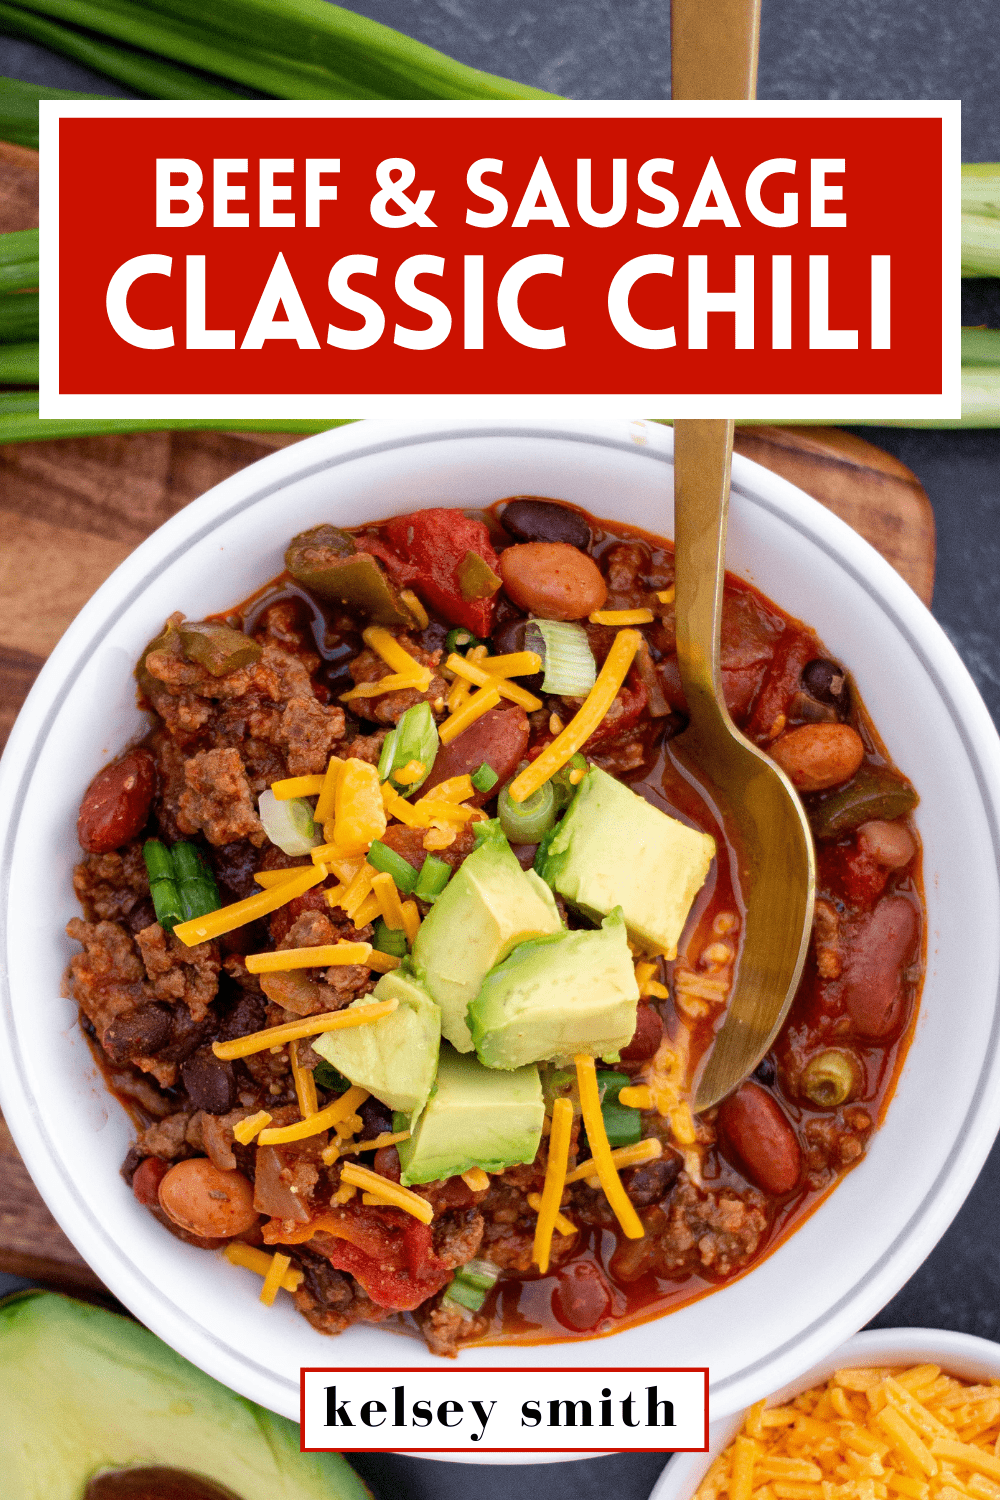 Small bowl of ground beef and sausage chili with shredded cheddar and diced avocado on top. Text at the top says Beef & Sausage Classic Chili.